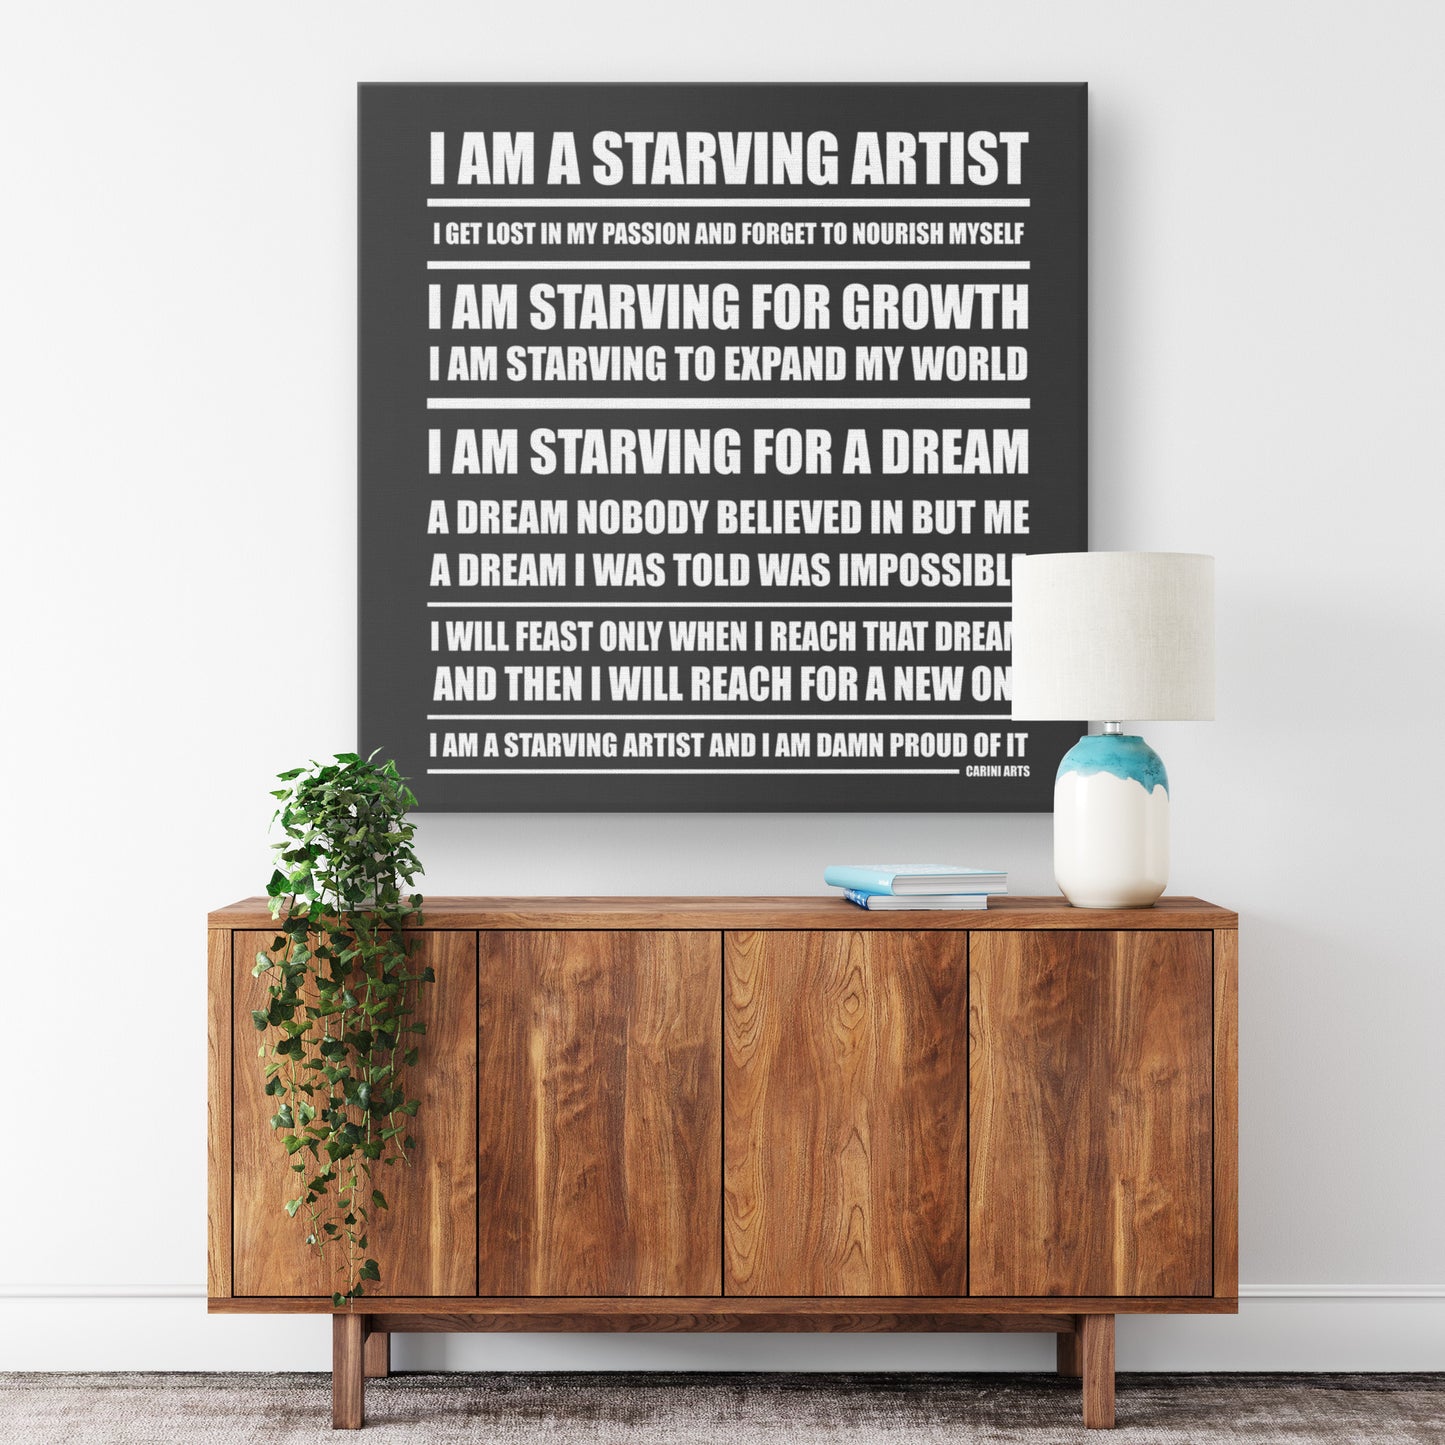 Michael Carini artist quotes about being a starving artist